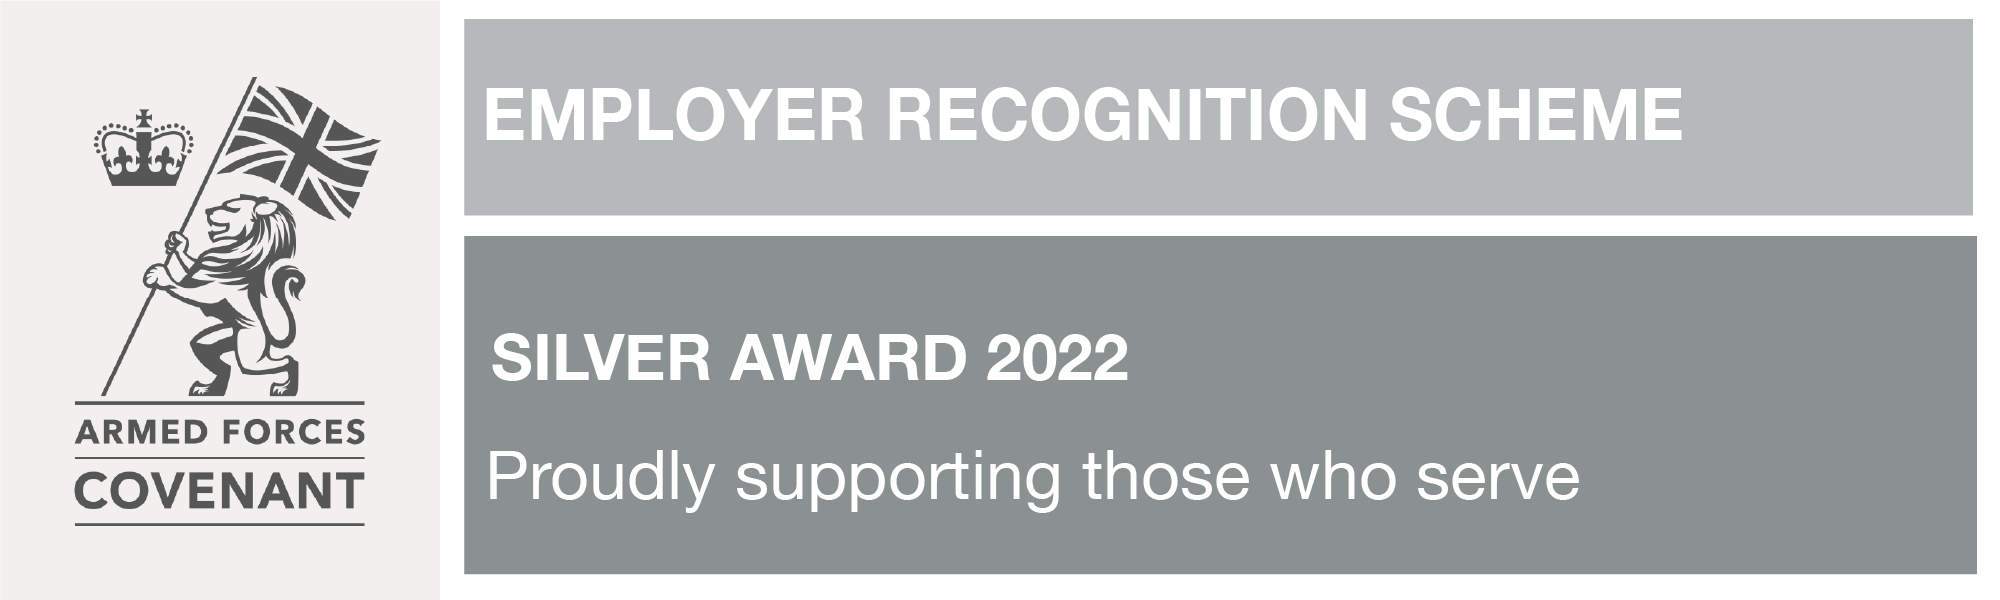 Employer Recognition Scheme Silver Award 2022 for Armed Forces Covenant